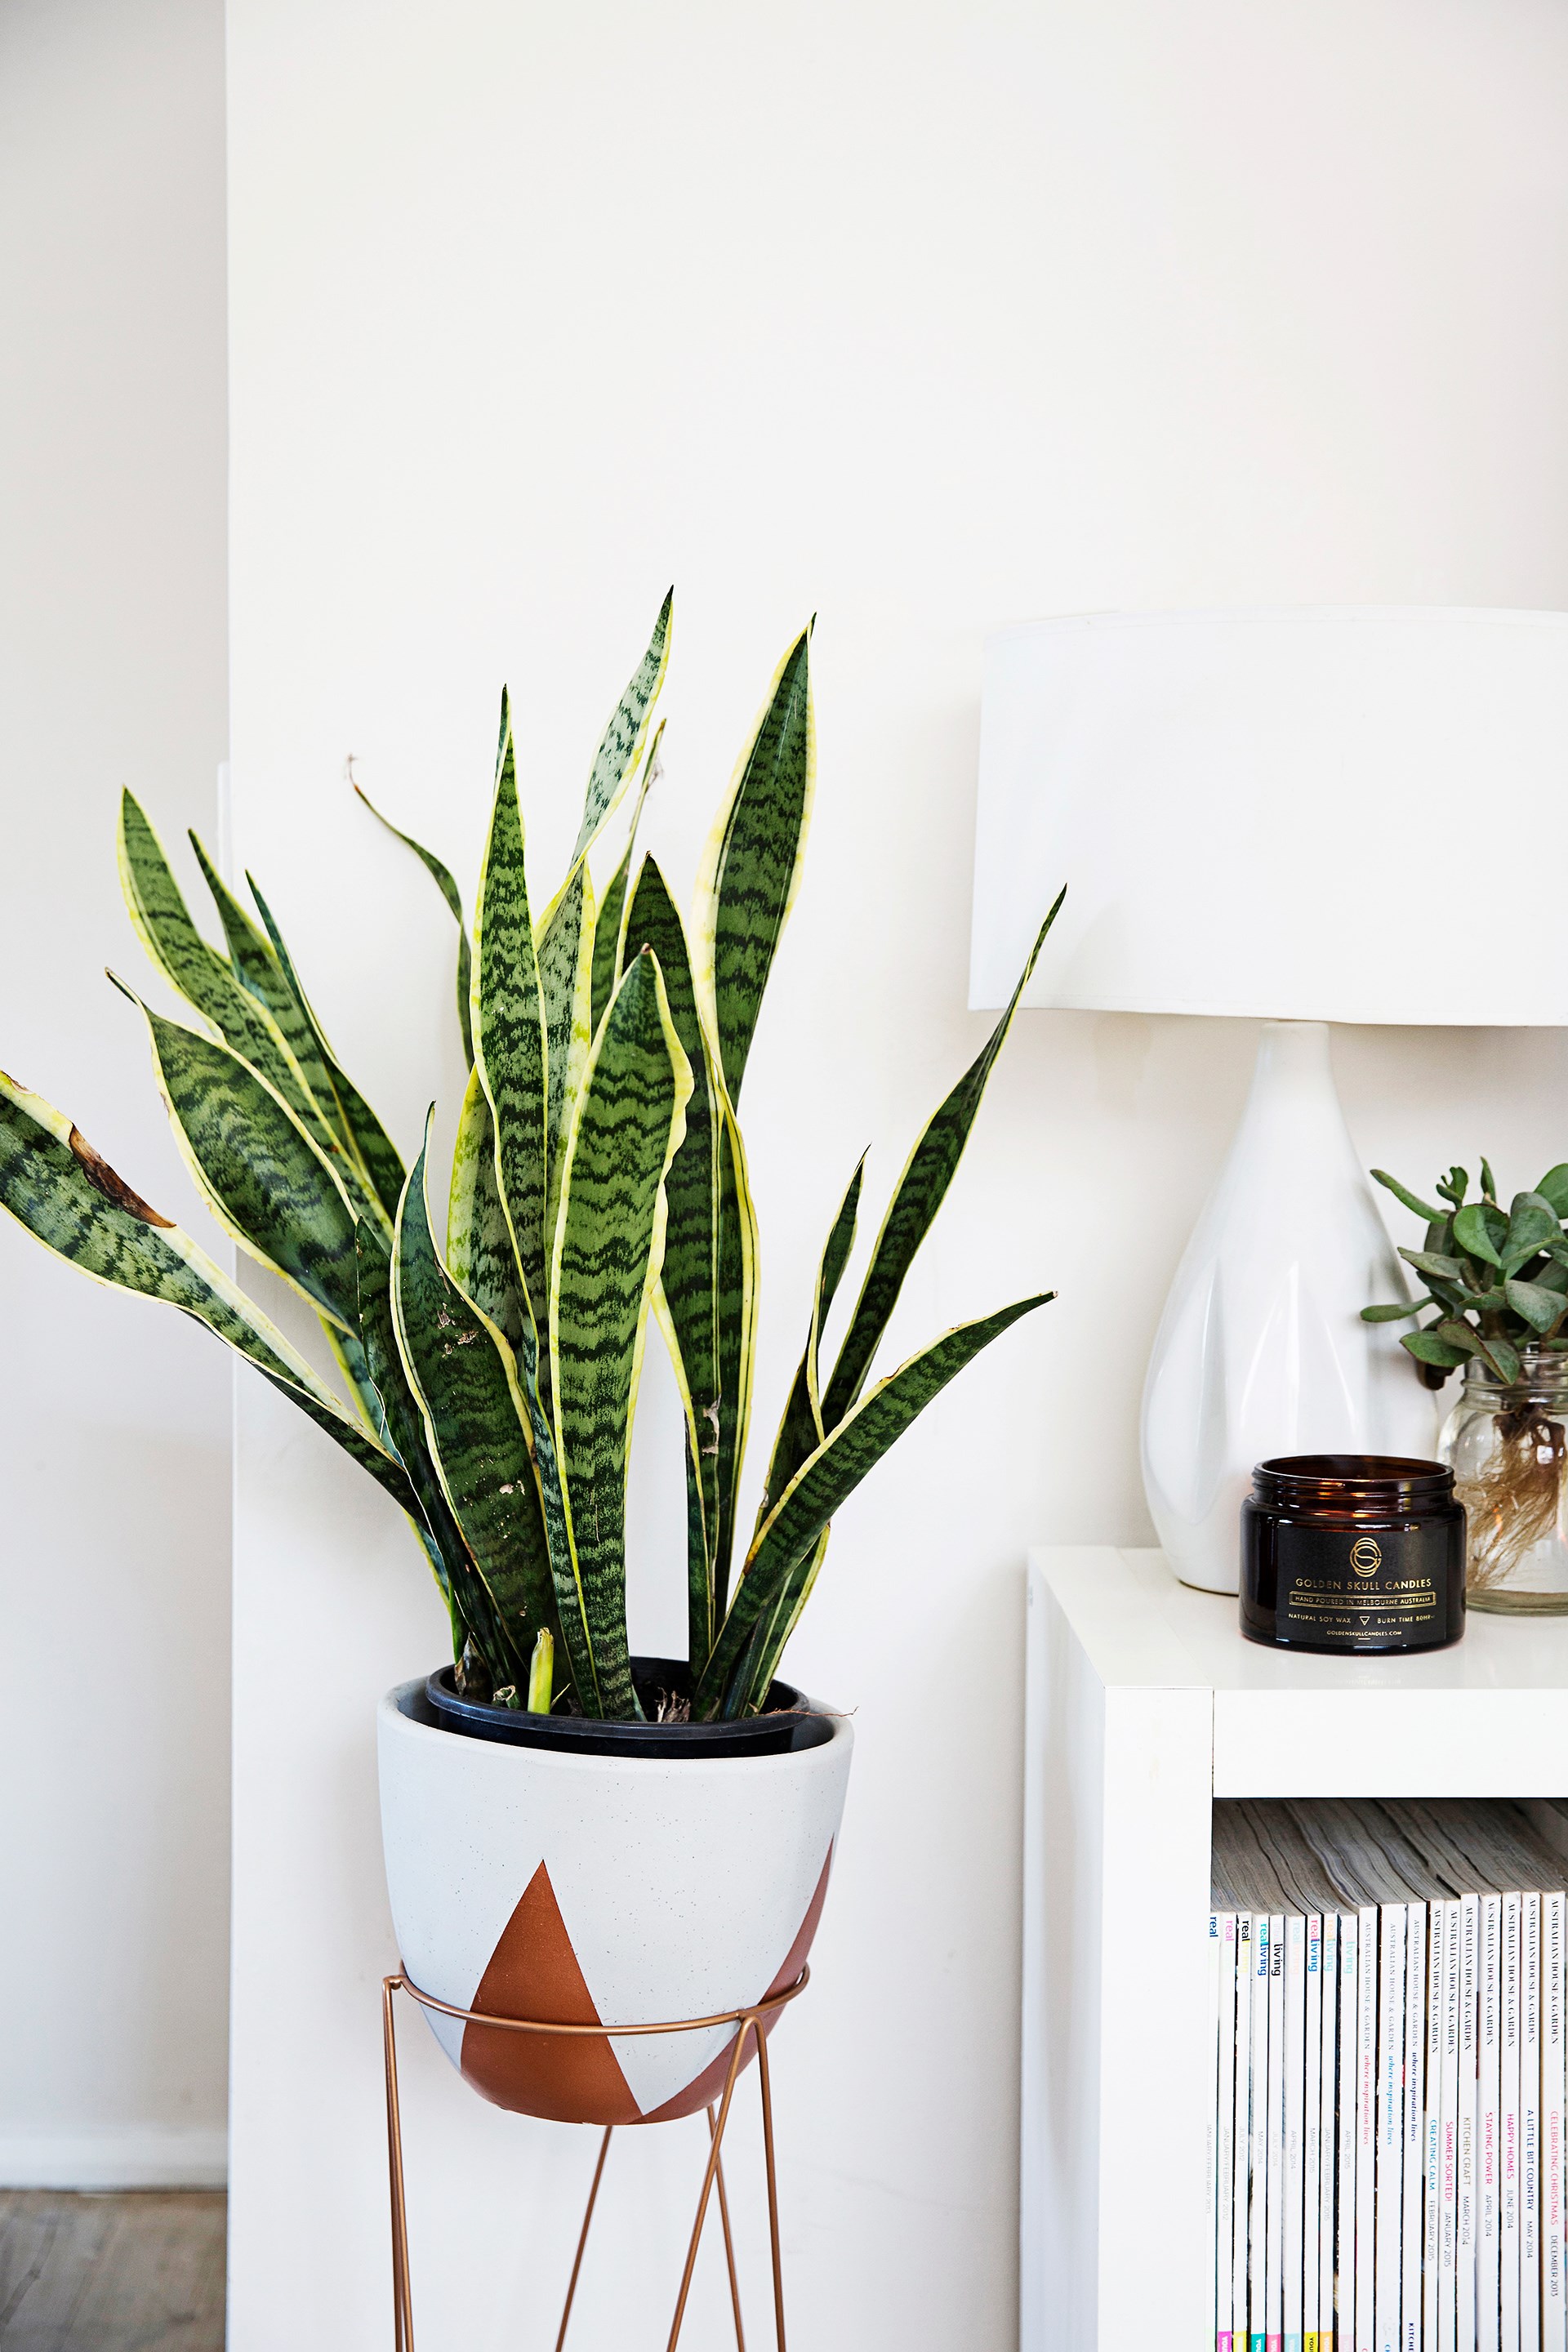 Keep this popular houseplant up high in a decorative plant stand. Photo: James Henry / bauersyndication.com.au